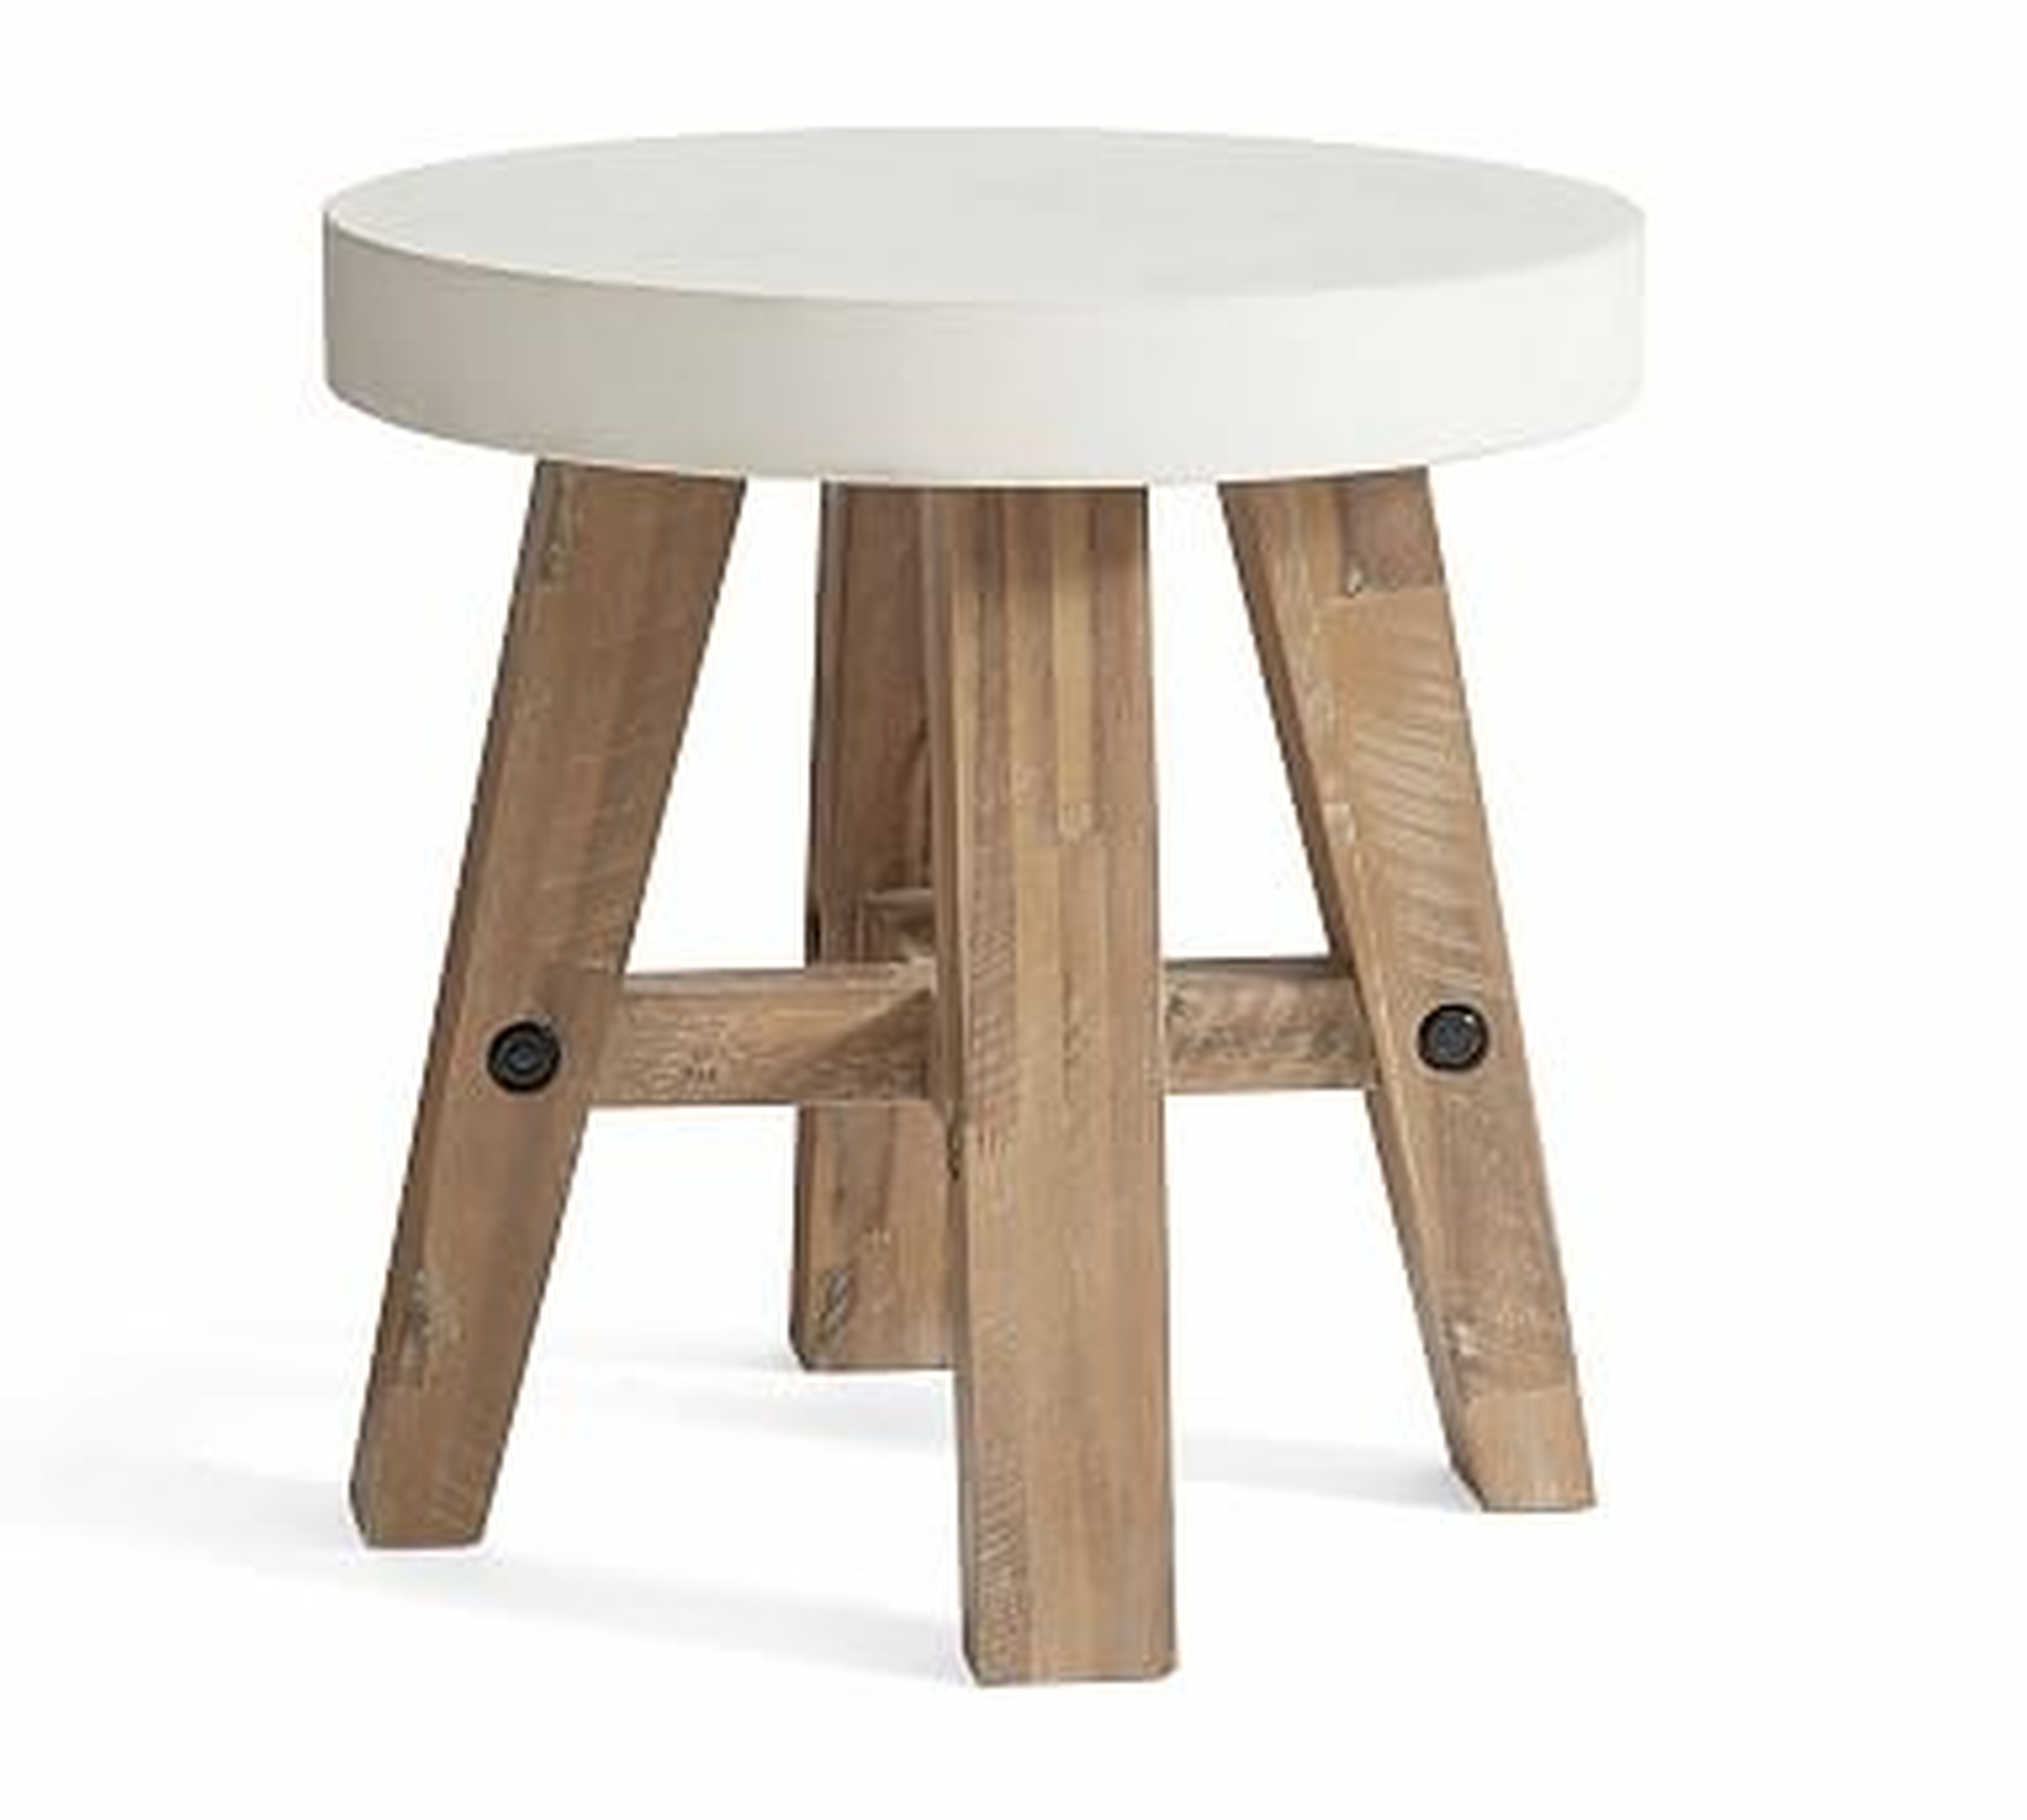 Capitola Concrete Round Side Table - Pottery Barn